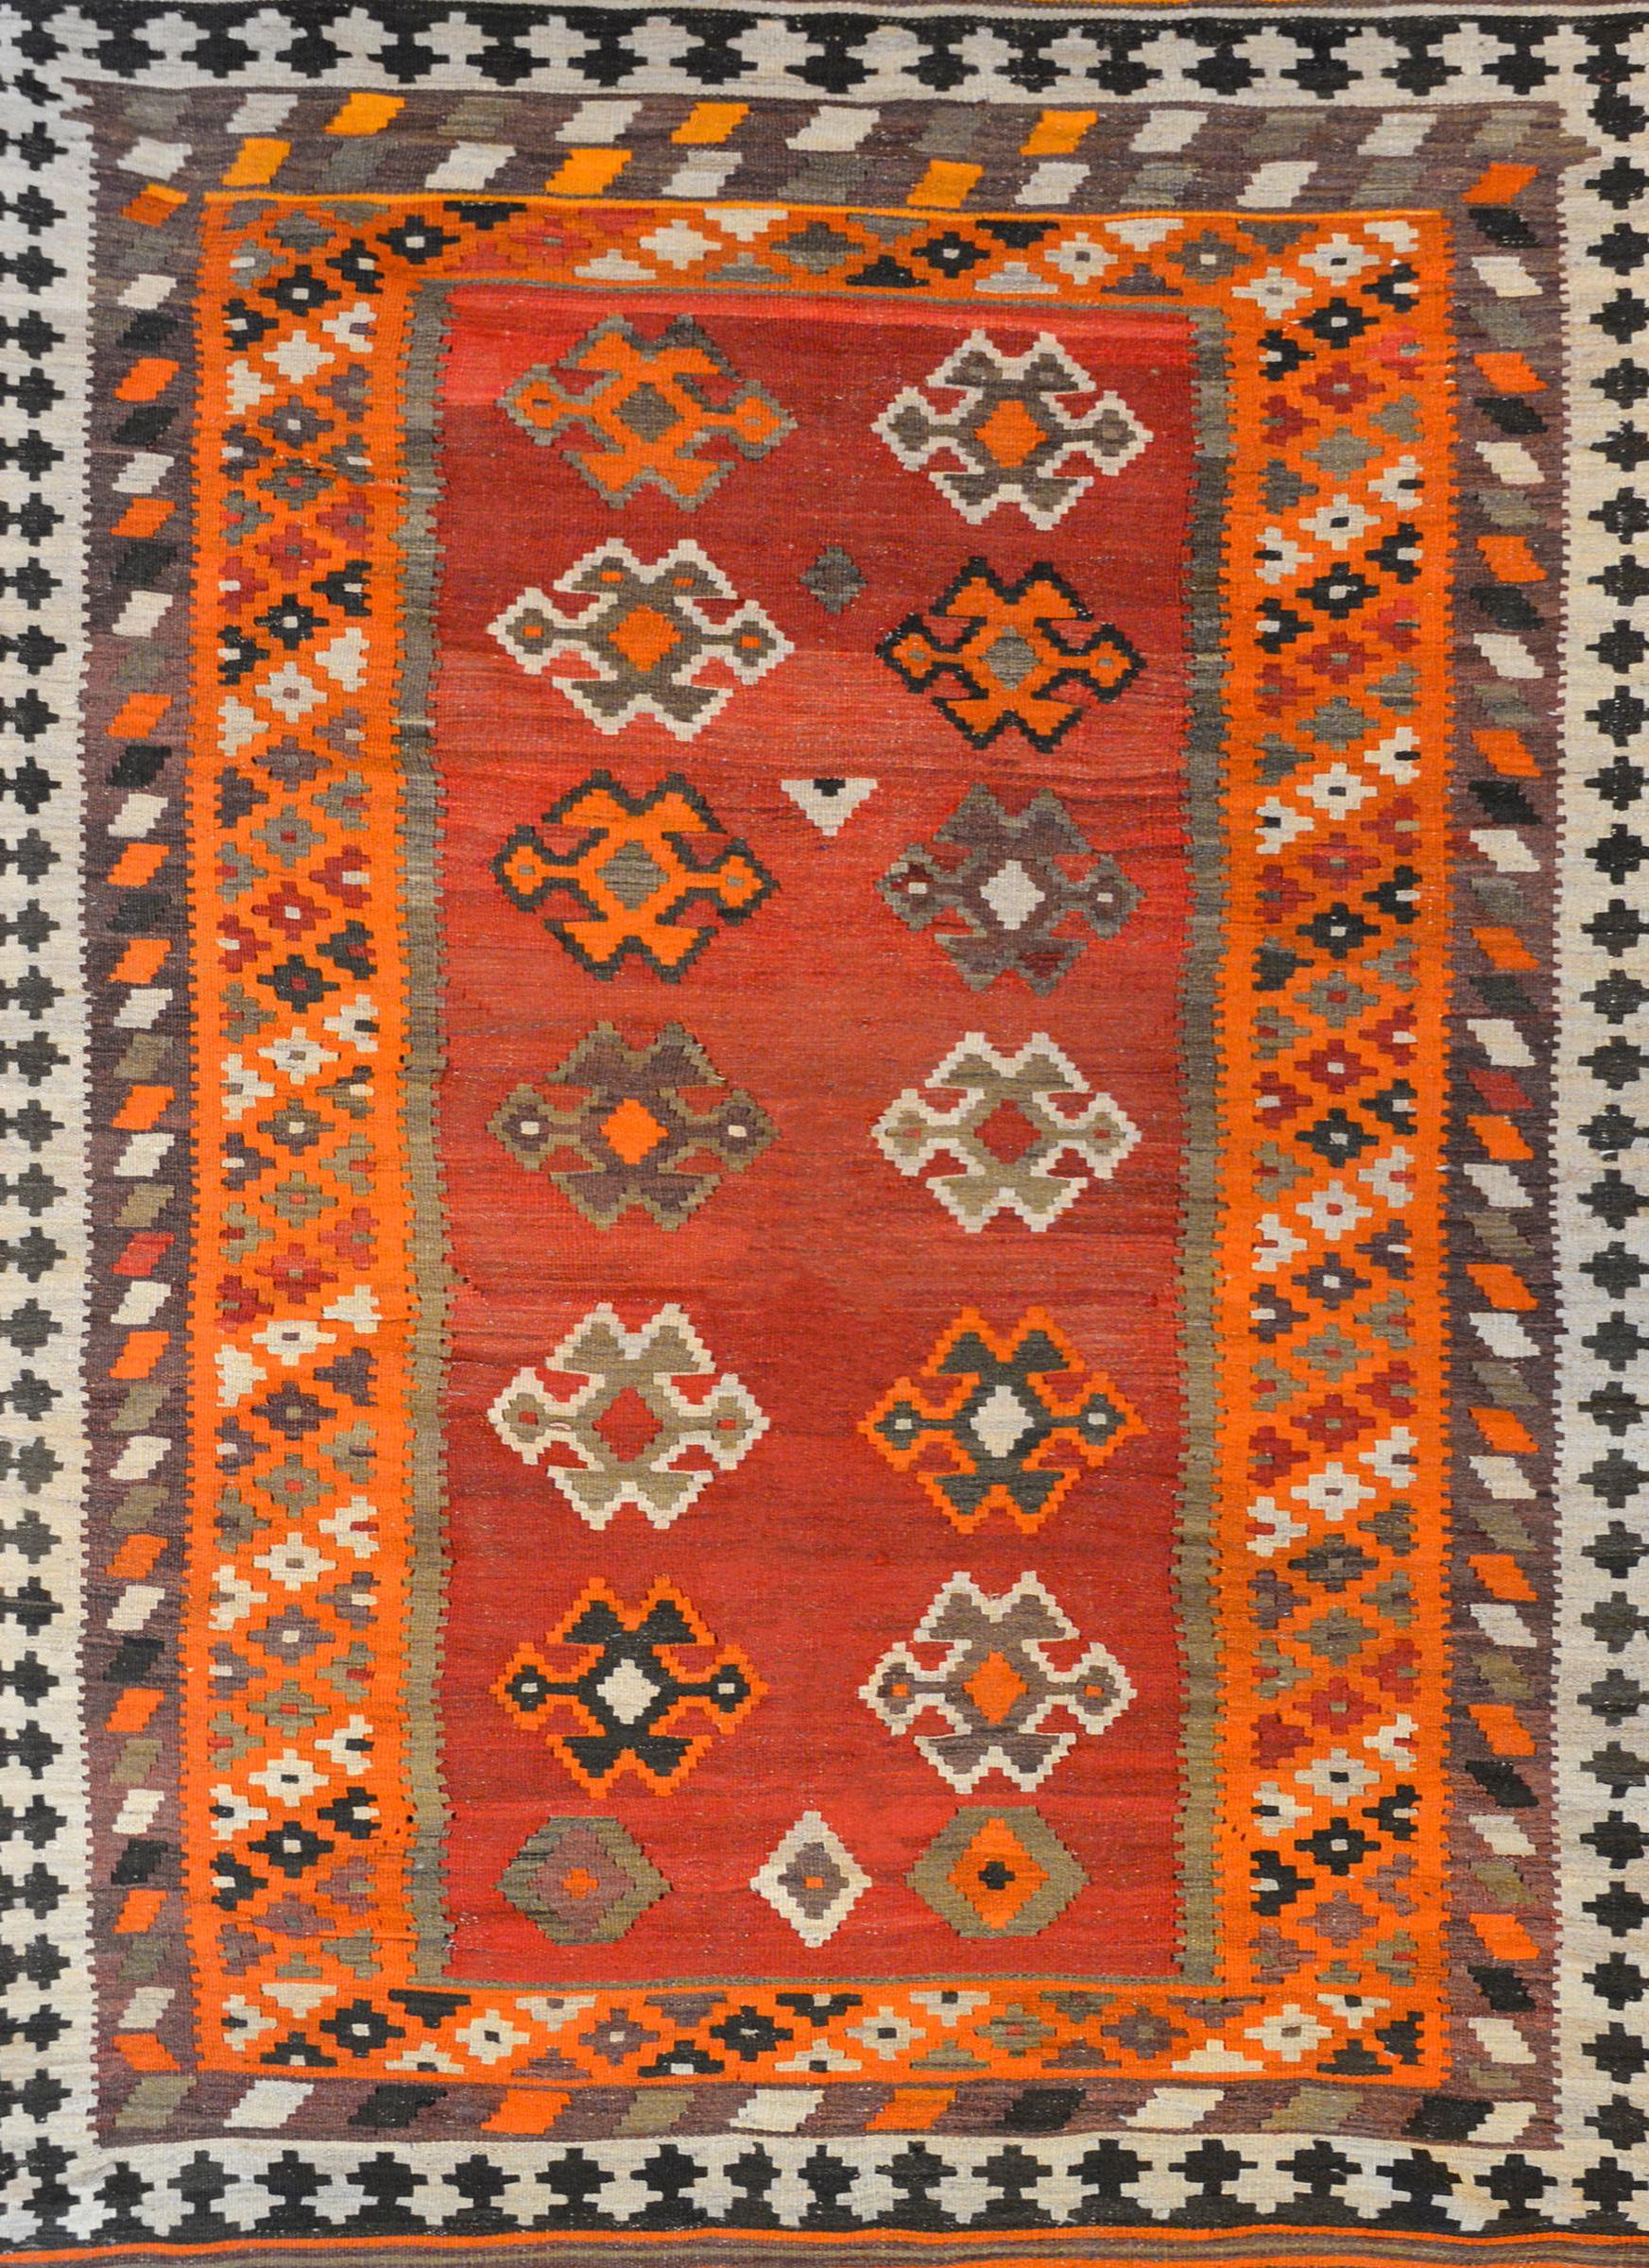 A wonderful bold mid-20th century Persian Shiraz Kilim rug with a fantastic pattern containing styled flowers woven in orange, white, grey, and black wool on an abrash crimson background surrounded by multiple petite geometric patterned stripes